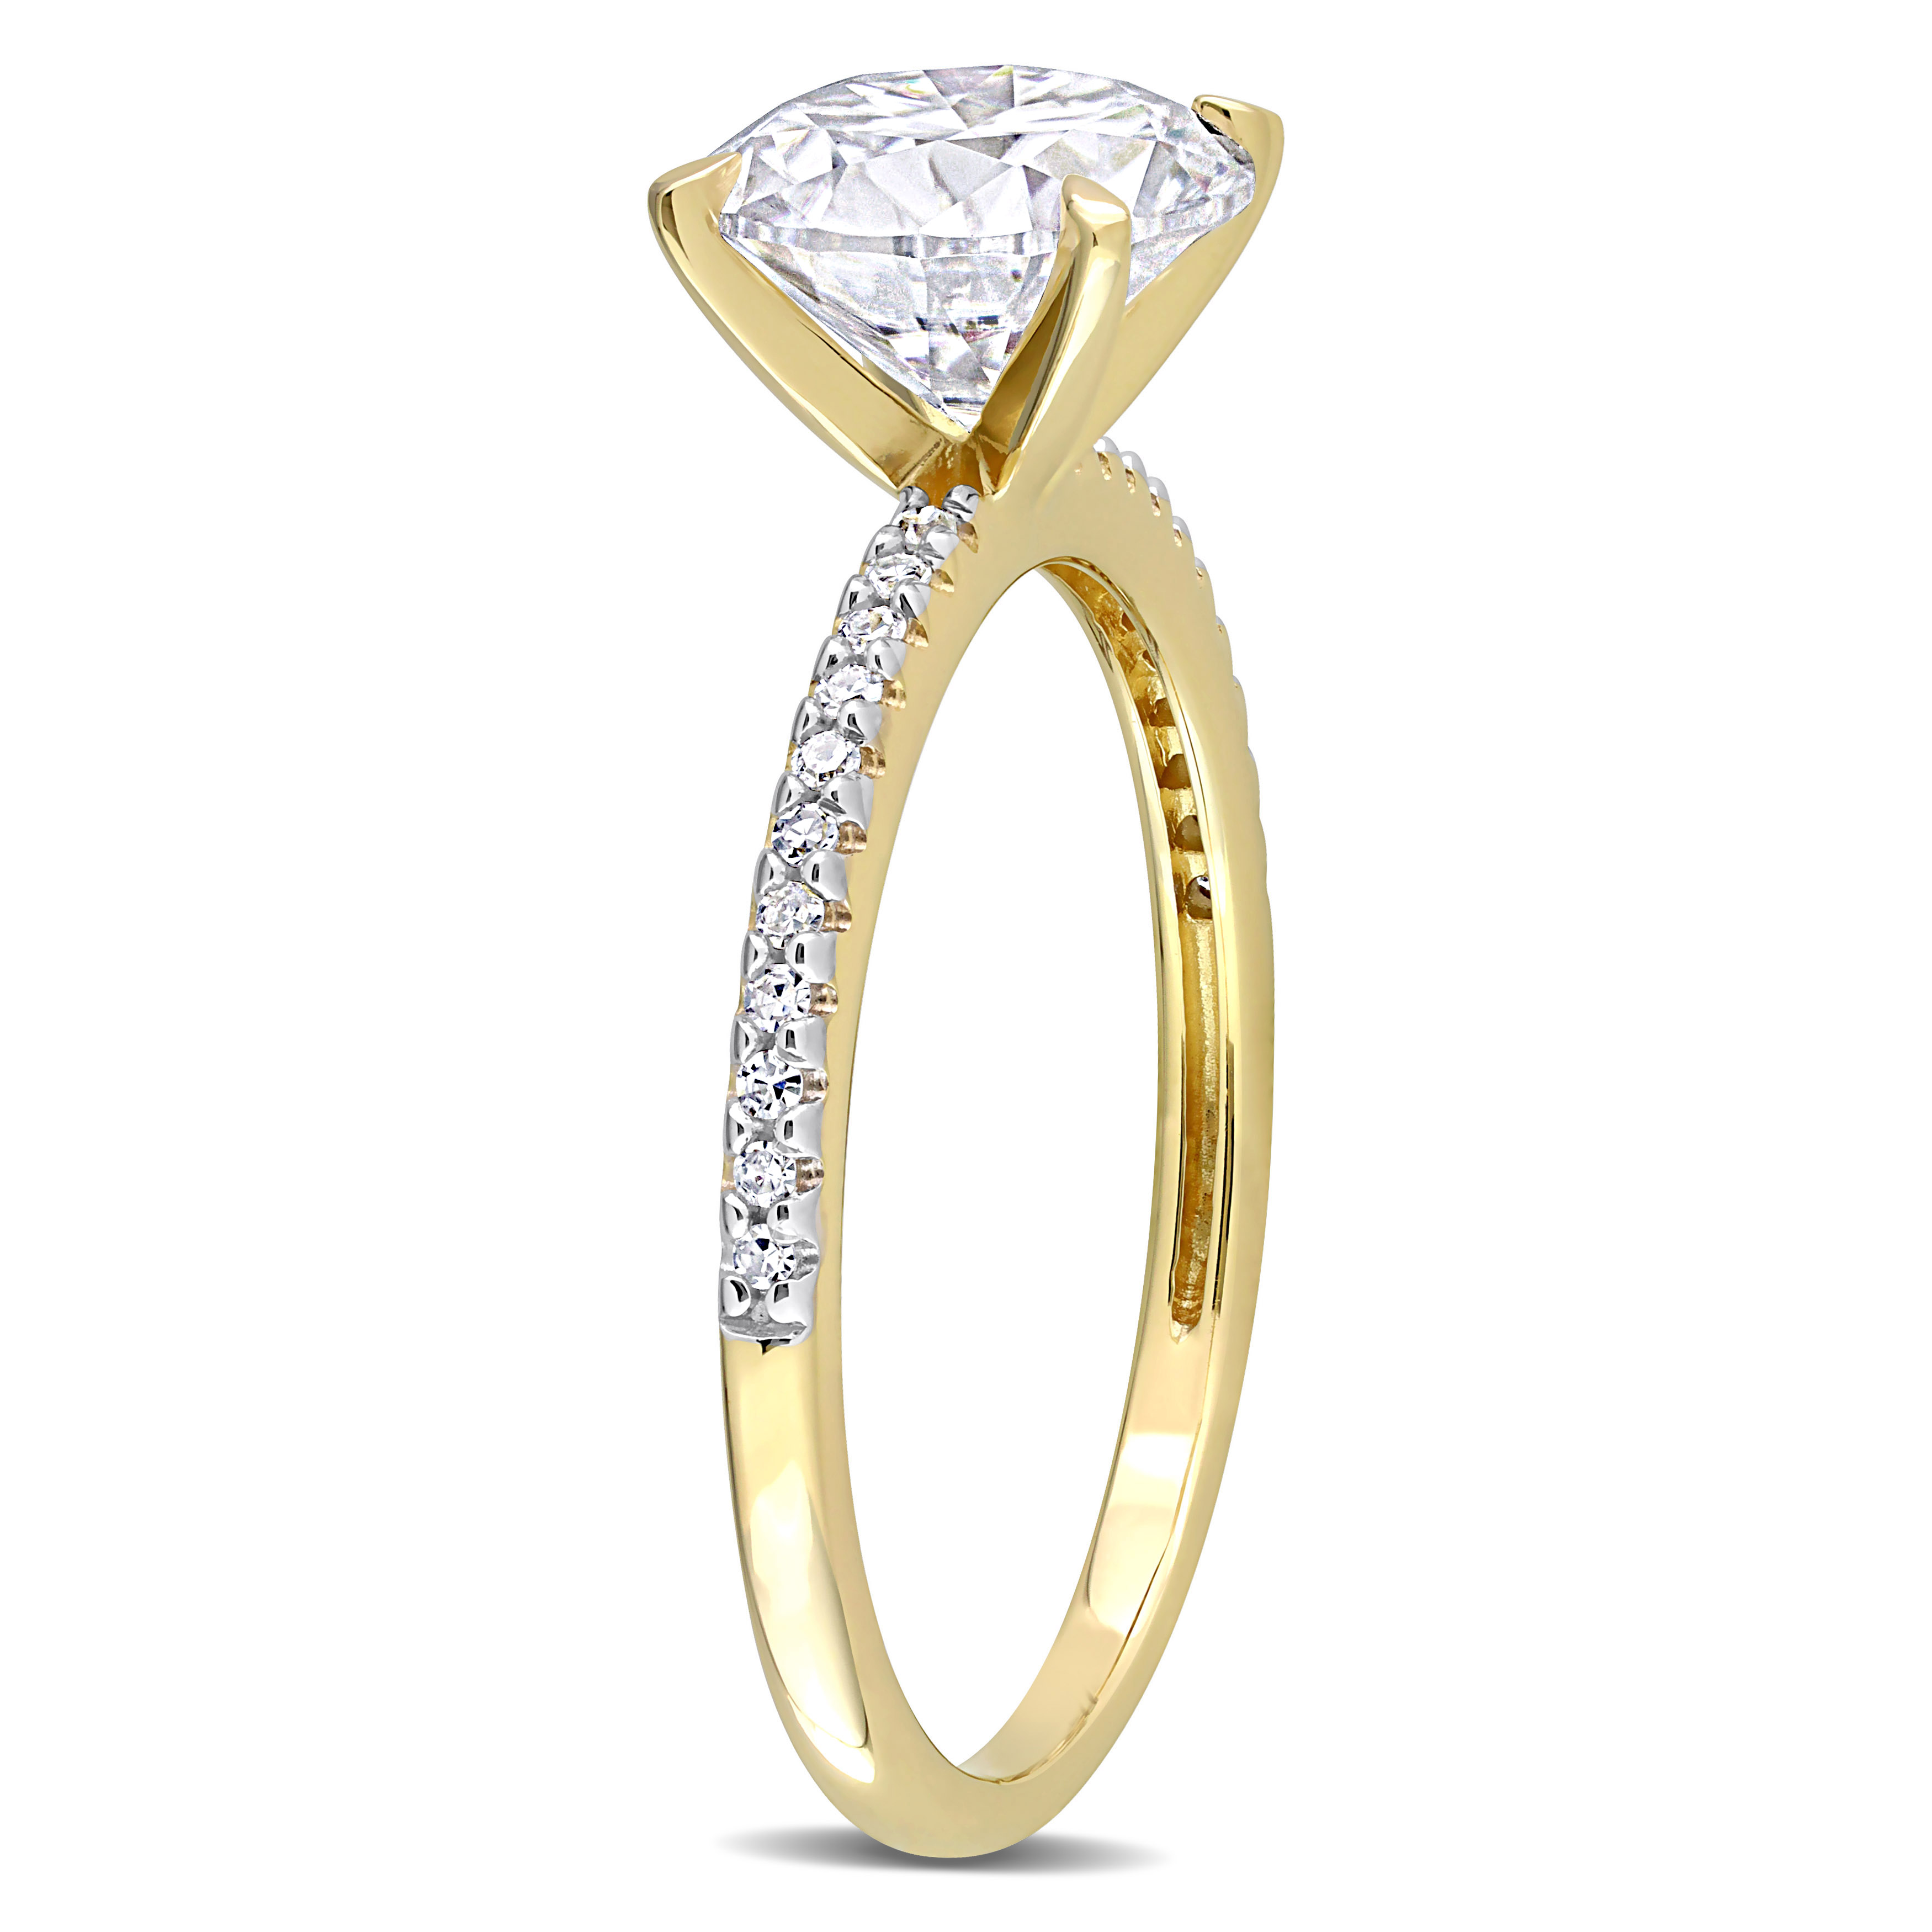 1 4/5 CT DEW Created Moissanite and 1/10 CT TDW Diamond Engagement Ring in 14k Yellow Gold